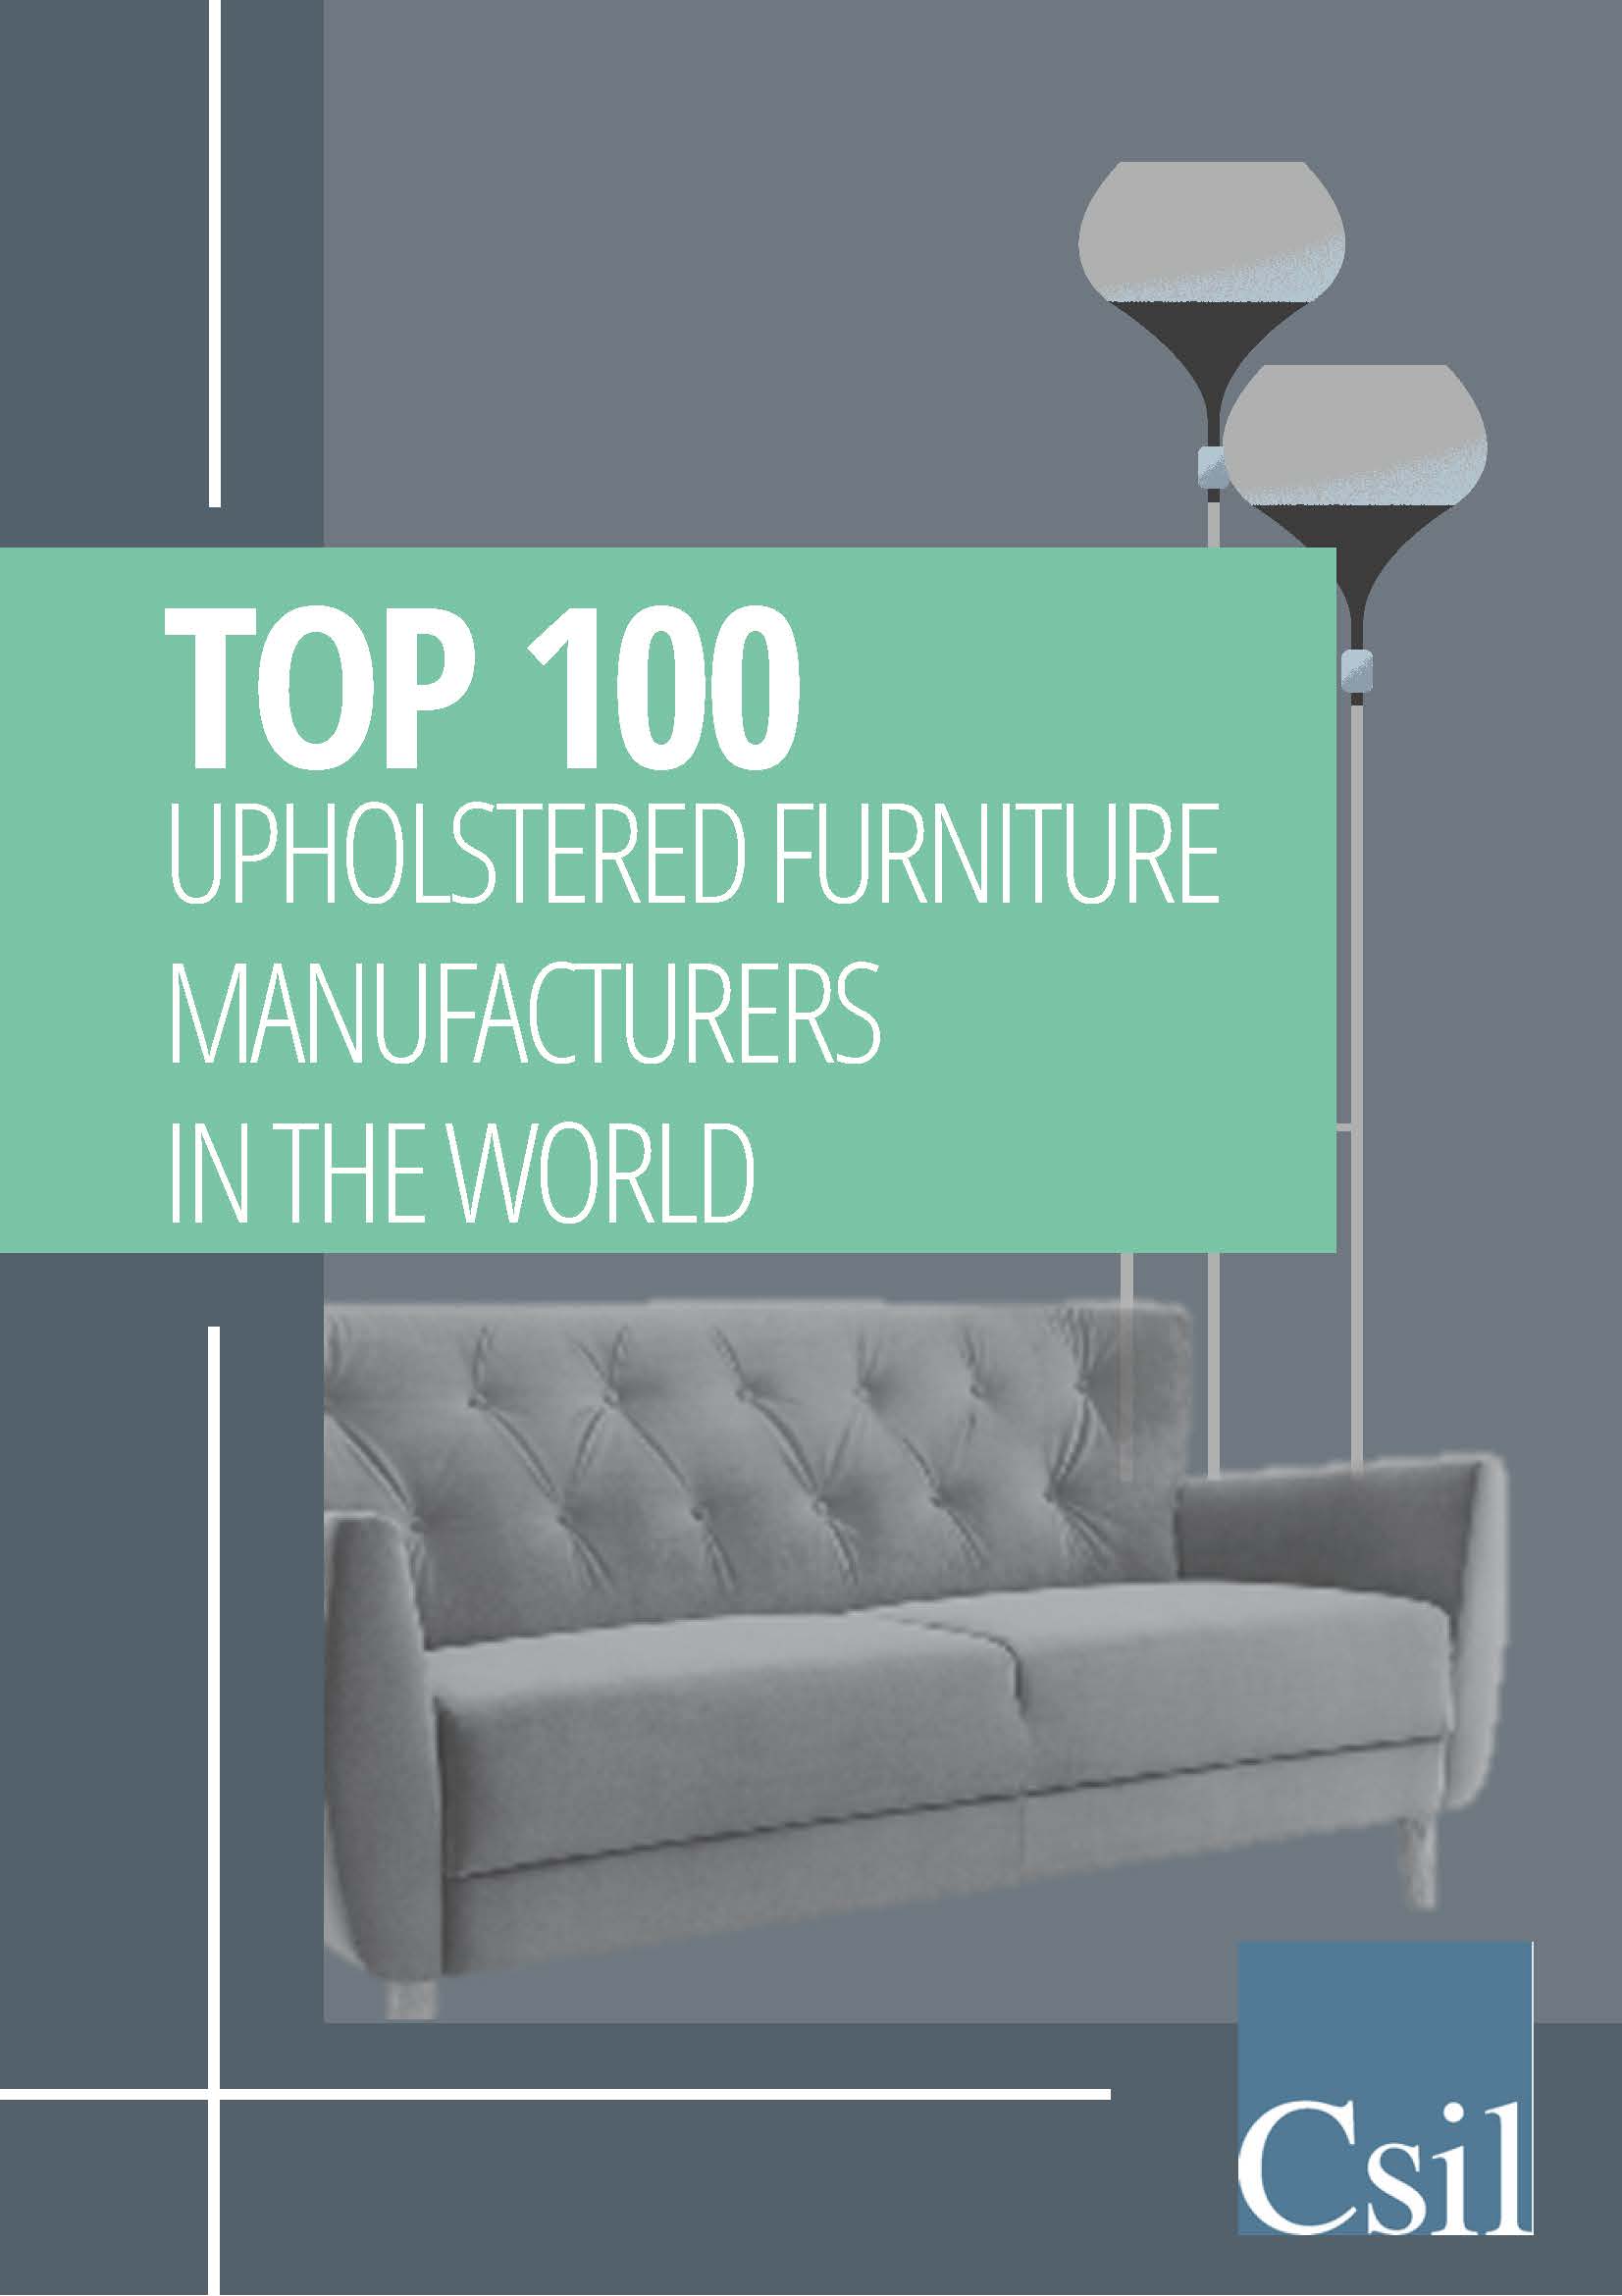 Top upholstered furniture manufacturers in the world